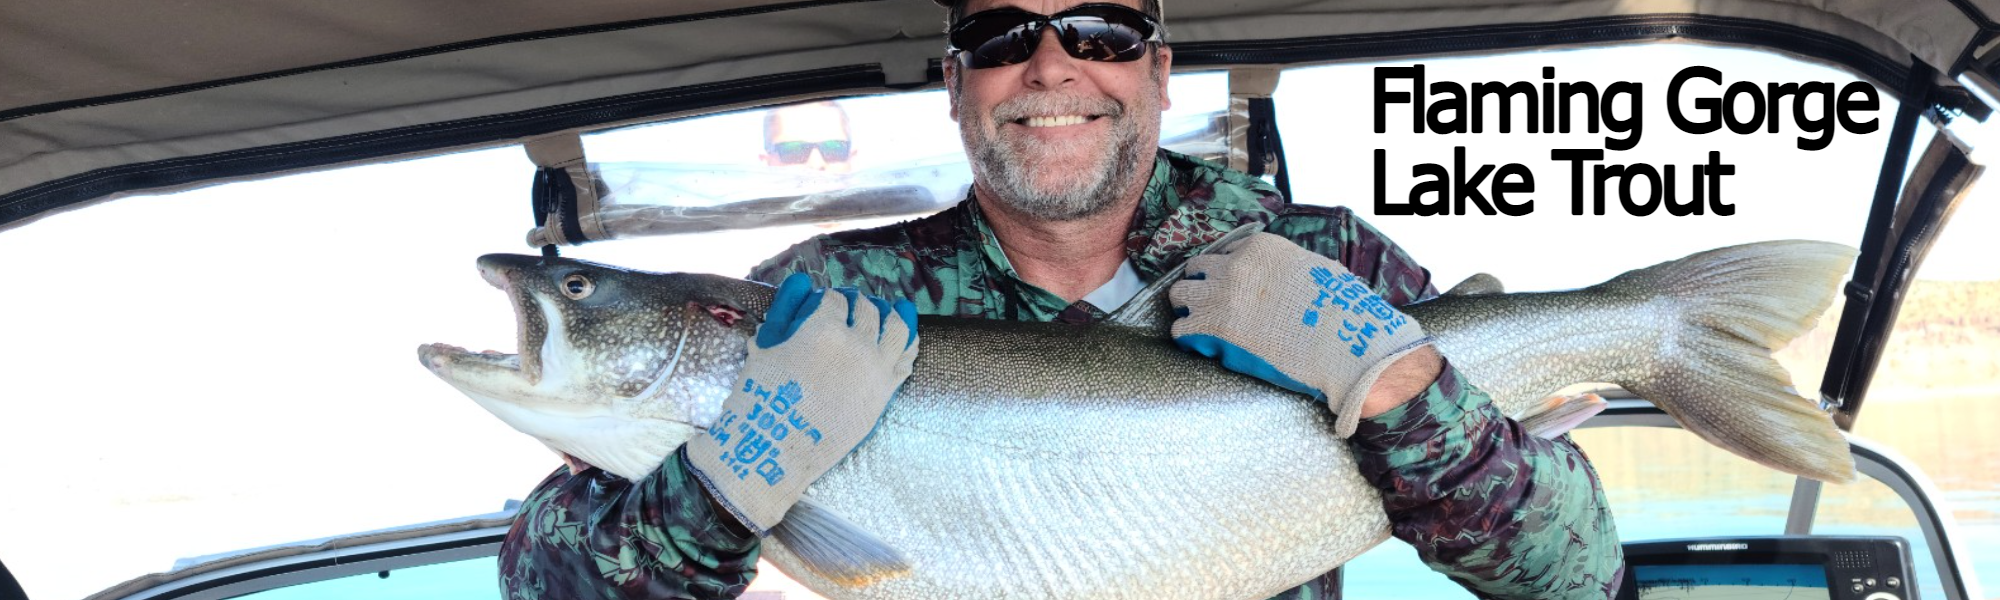 Big Fish from Flaming Gorge caught by Doug